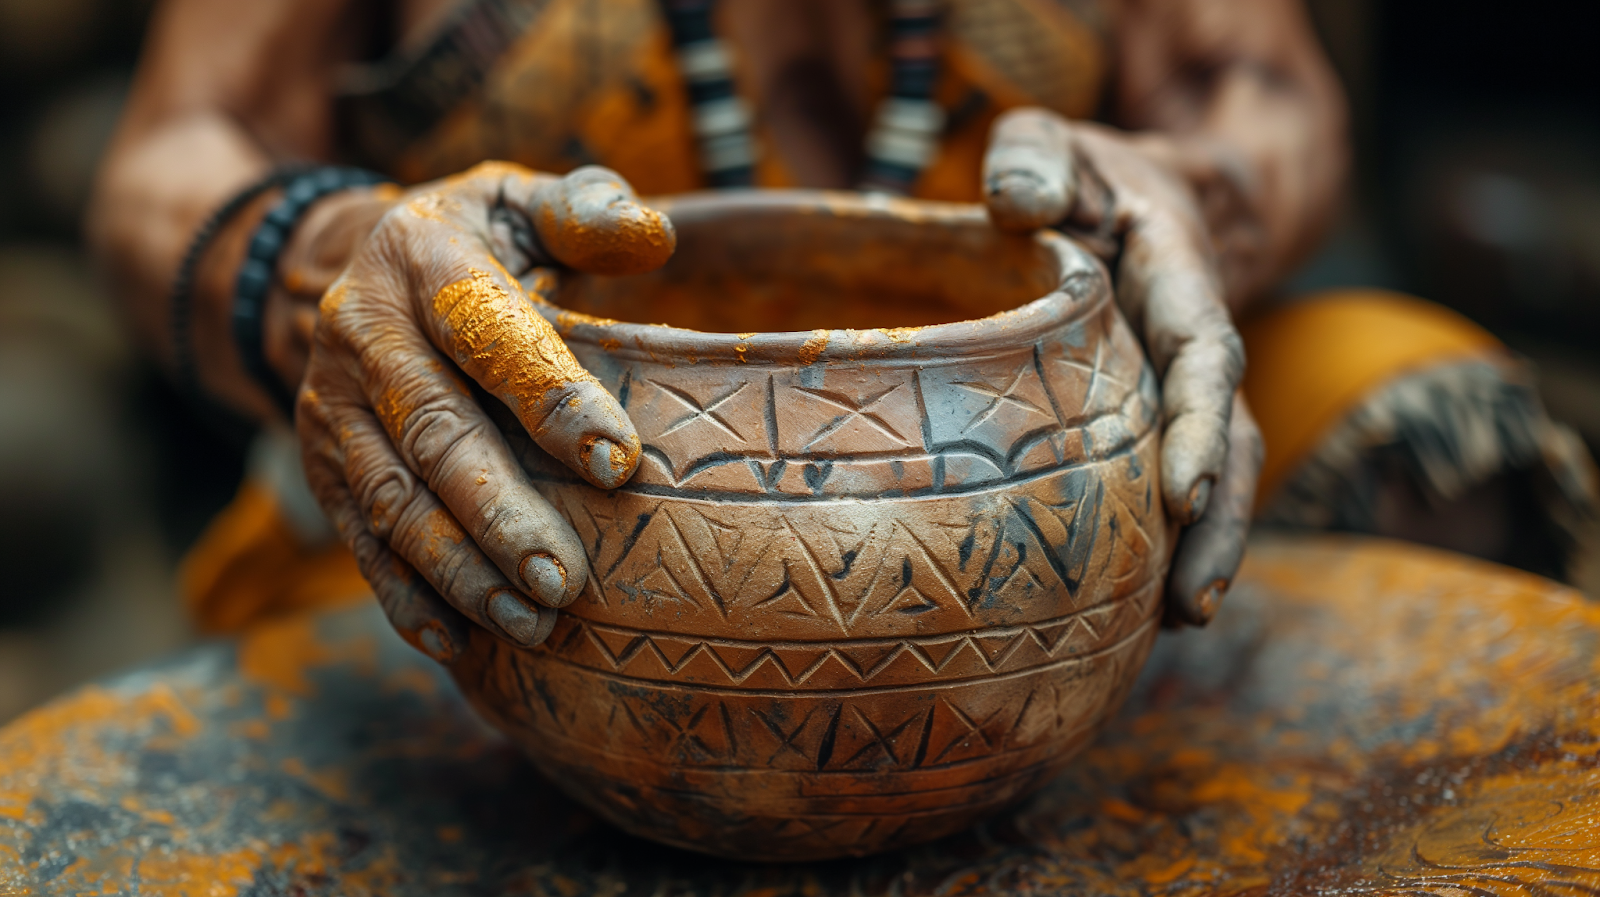 Artisan crafting Aztec-inspired pottery, detailing the process and traditional designs.